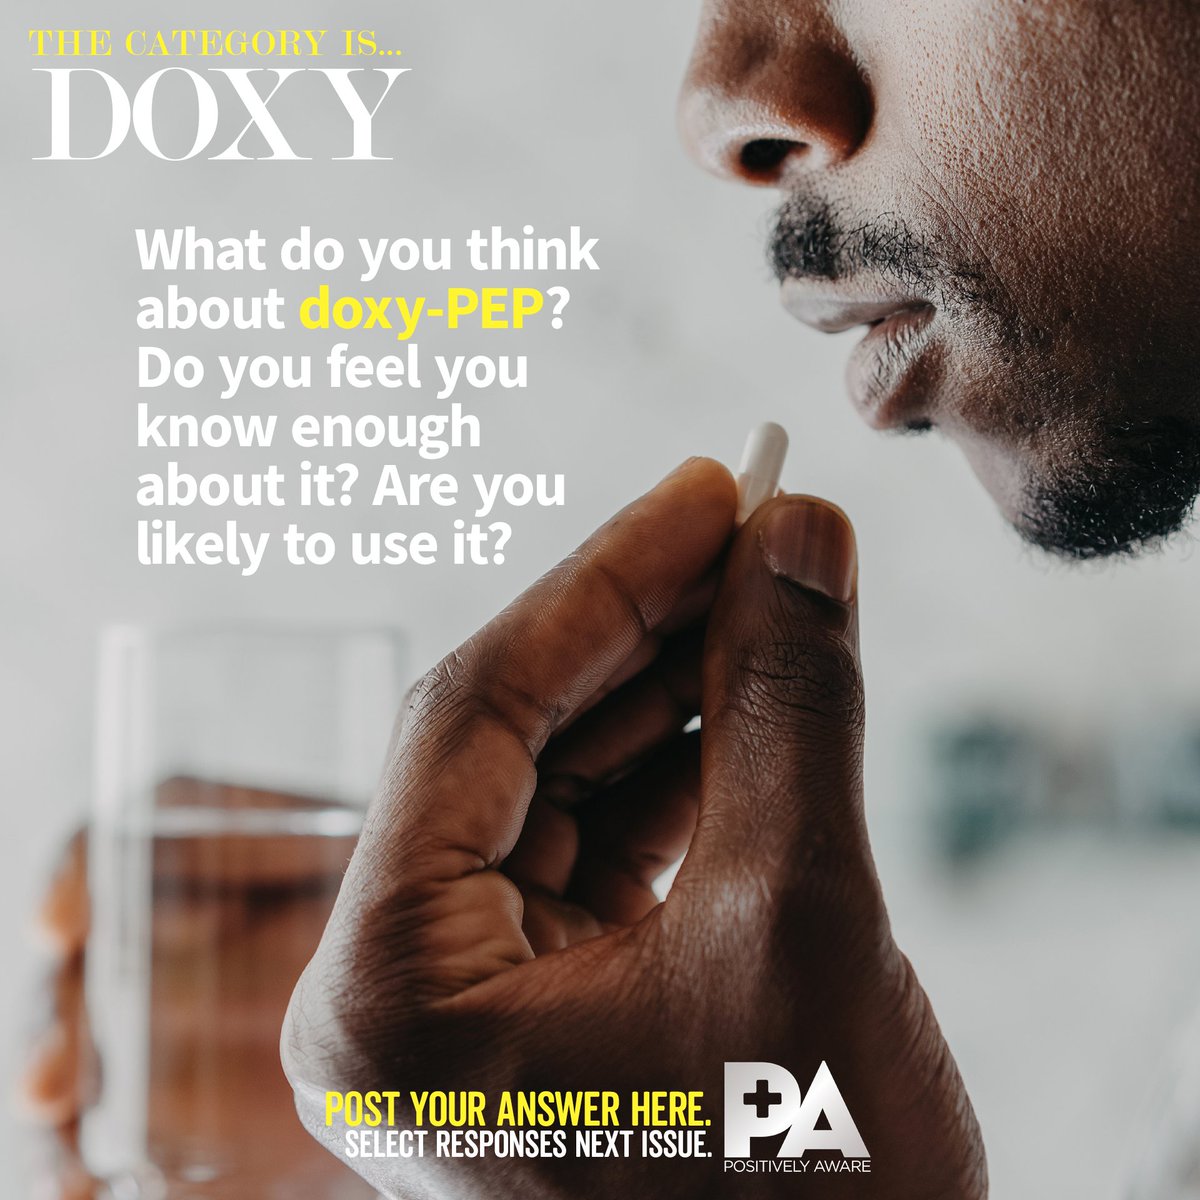 The oral antibiotic doxycycline has been shown to reduce sexually transmitted infections by two-thirds in MSMs when taken within 72 hours. @PosAware wants to know: What do you think about doxy-PEP? Do you feel you know enough about doxy-PEP? Are you likely to use it?